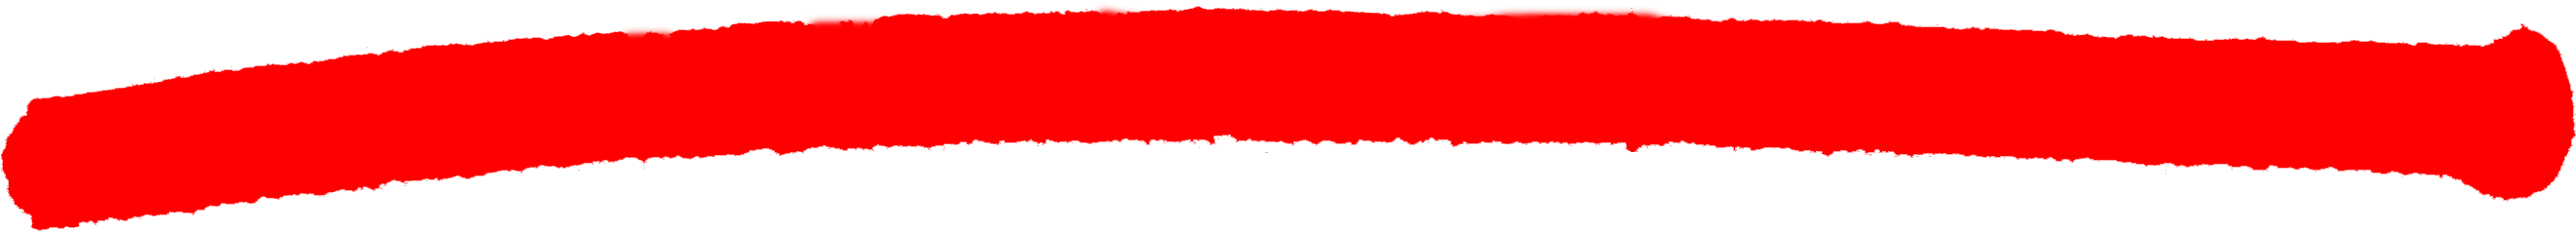 Simple Red Line Png Image - Carmine (2900x875)